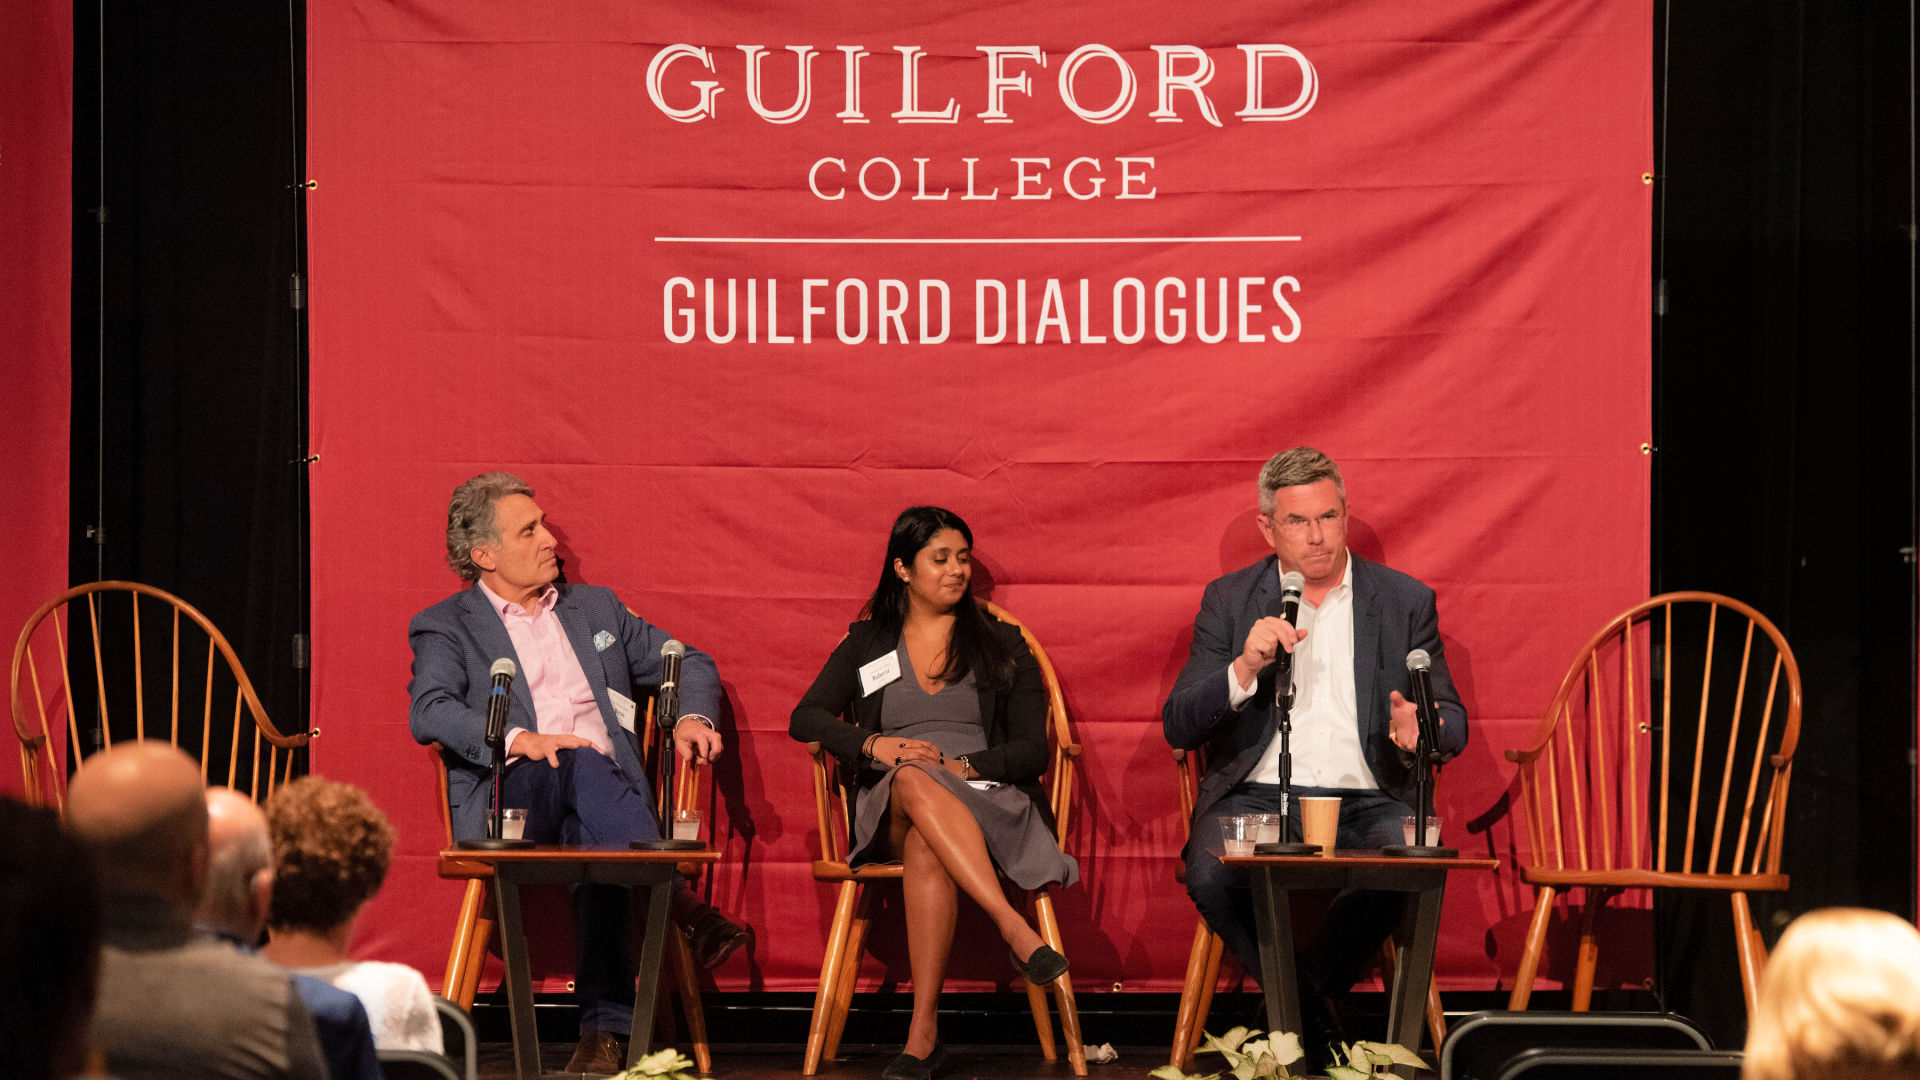 On stage at the Guilford Dialogues, seated in chairs, from left: Byron Loflin, Roberta Lobo, and Graham Macmillan.